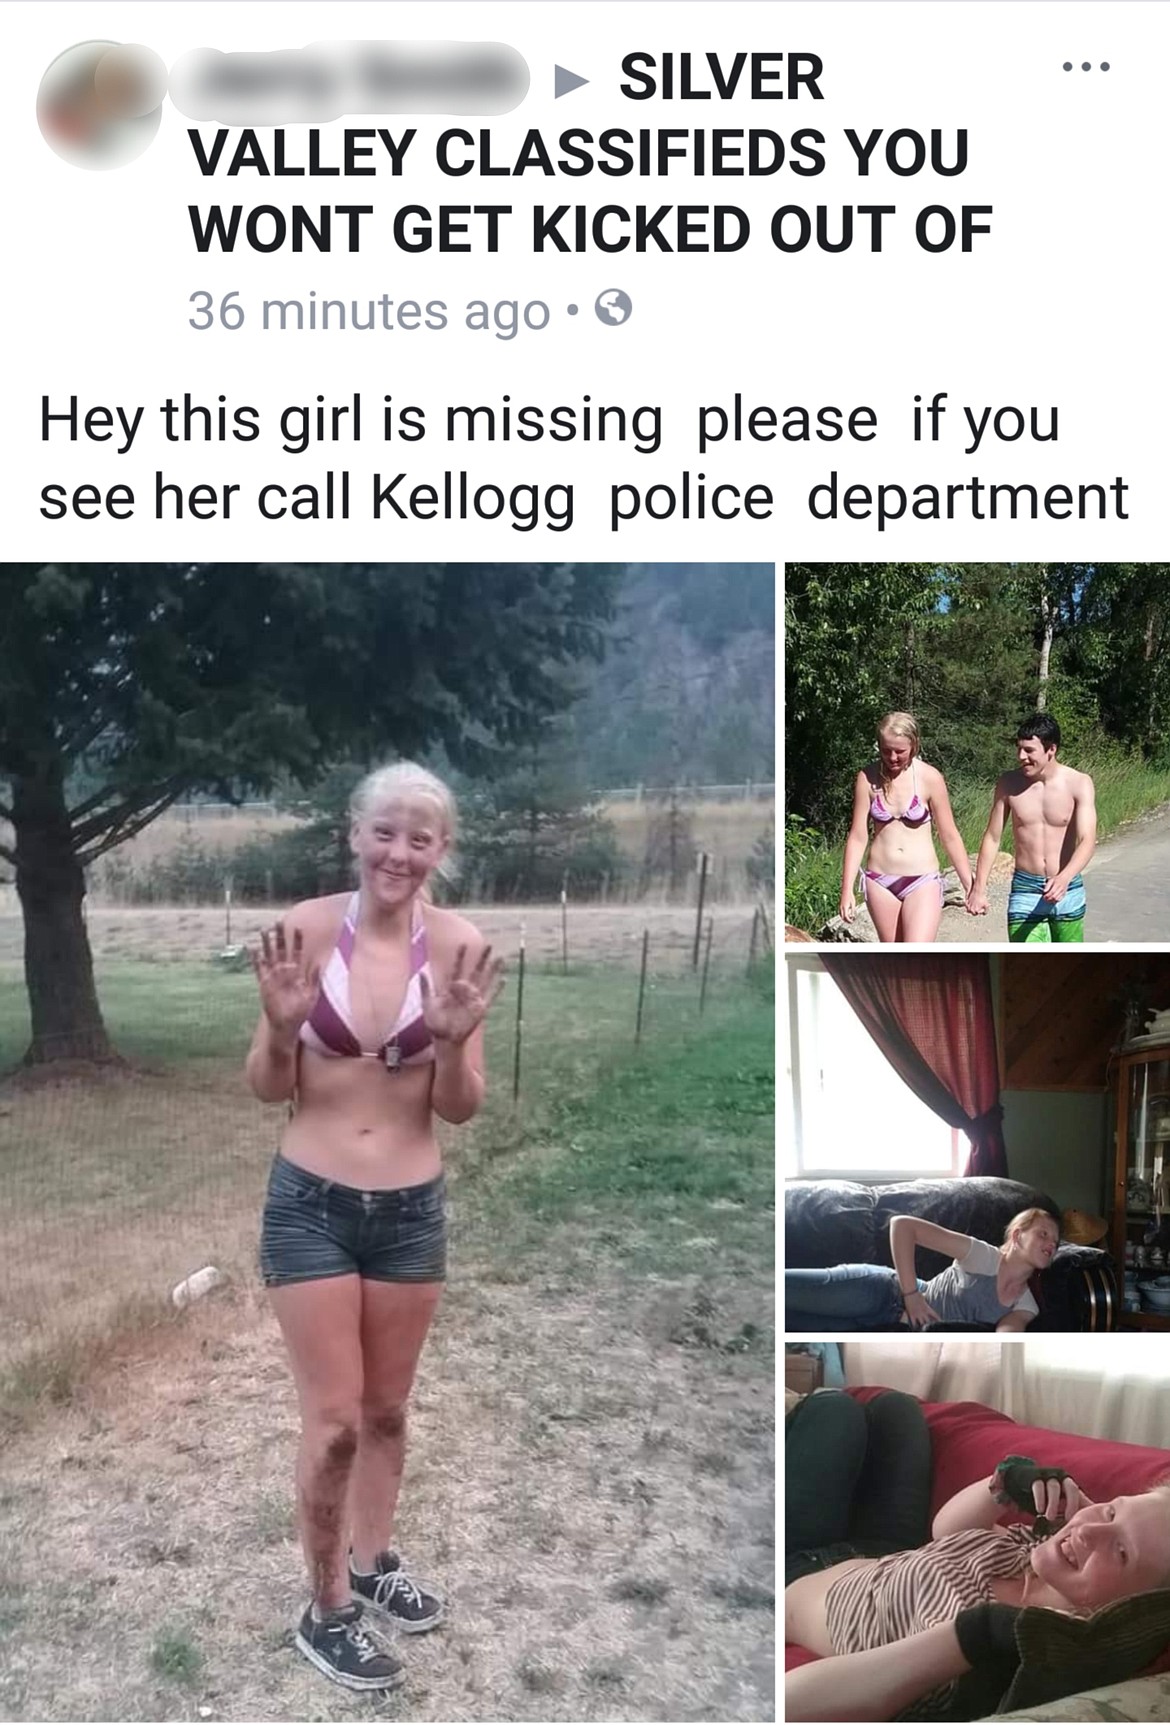 Courtesy photo/
The Wednesday morning Facebook post that brought a spotlight on the runaway. Those close to the female juvenile confirmed that the photos included in the post are of her.